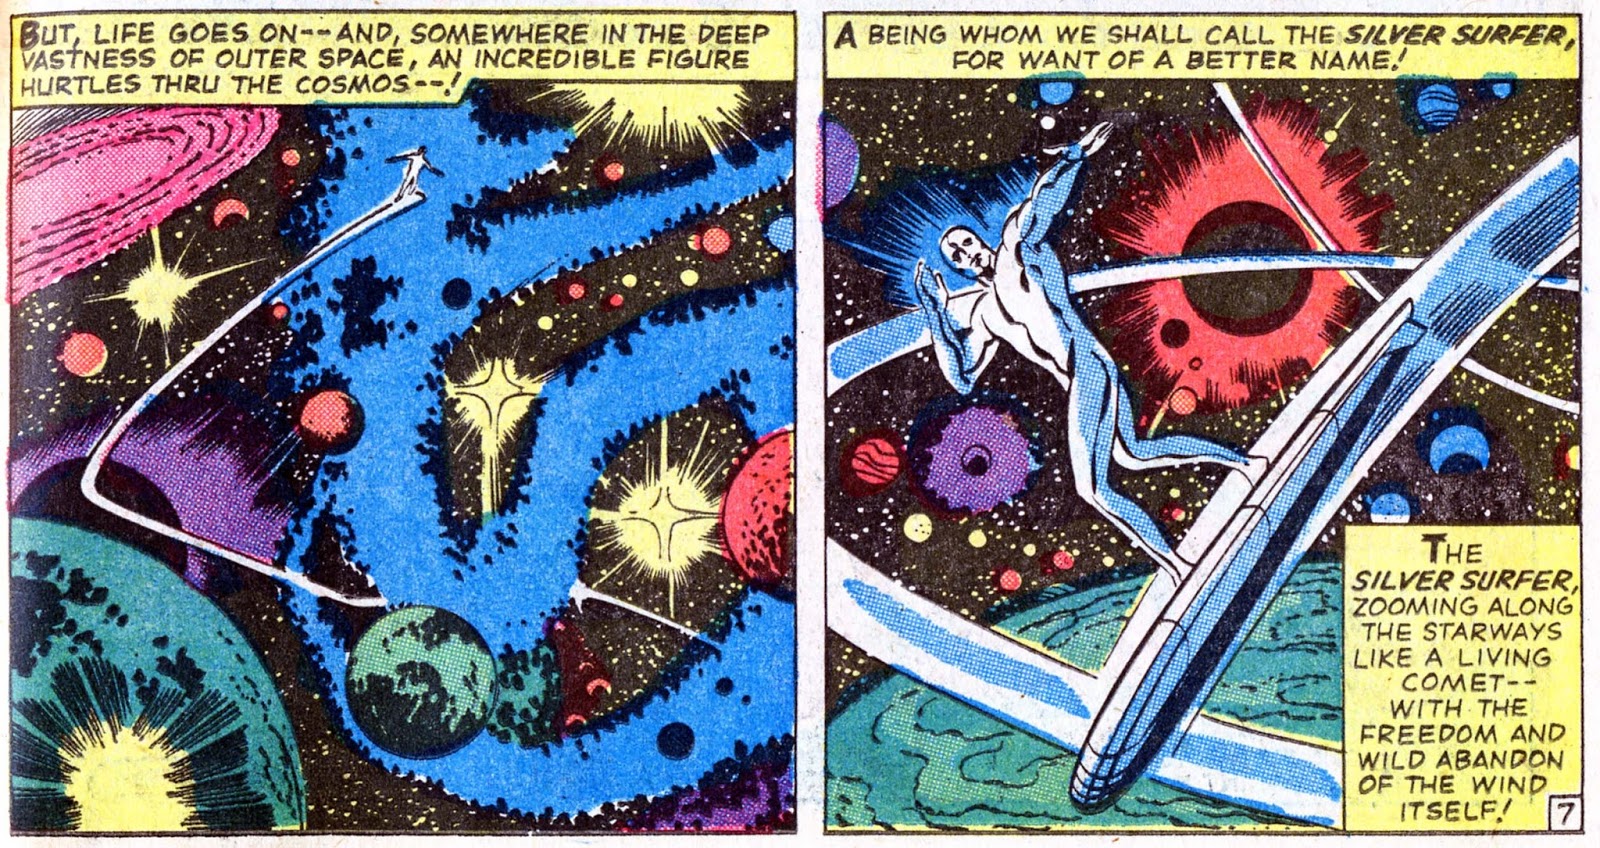 Barry S Pearls Of Comic Book Wisdom The Startling Blog Of The Silver Surfer